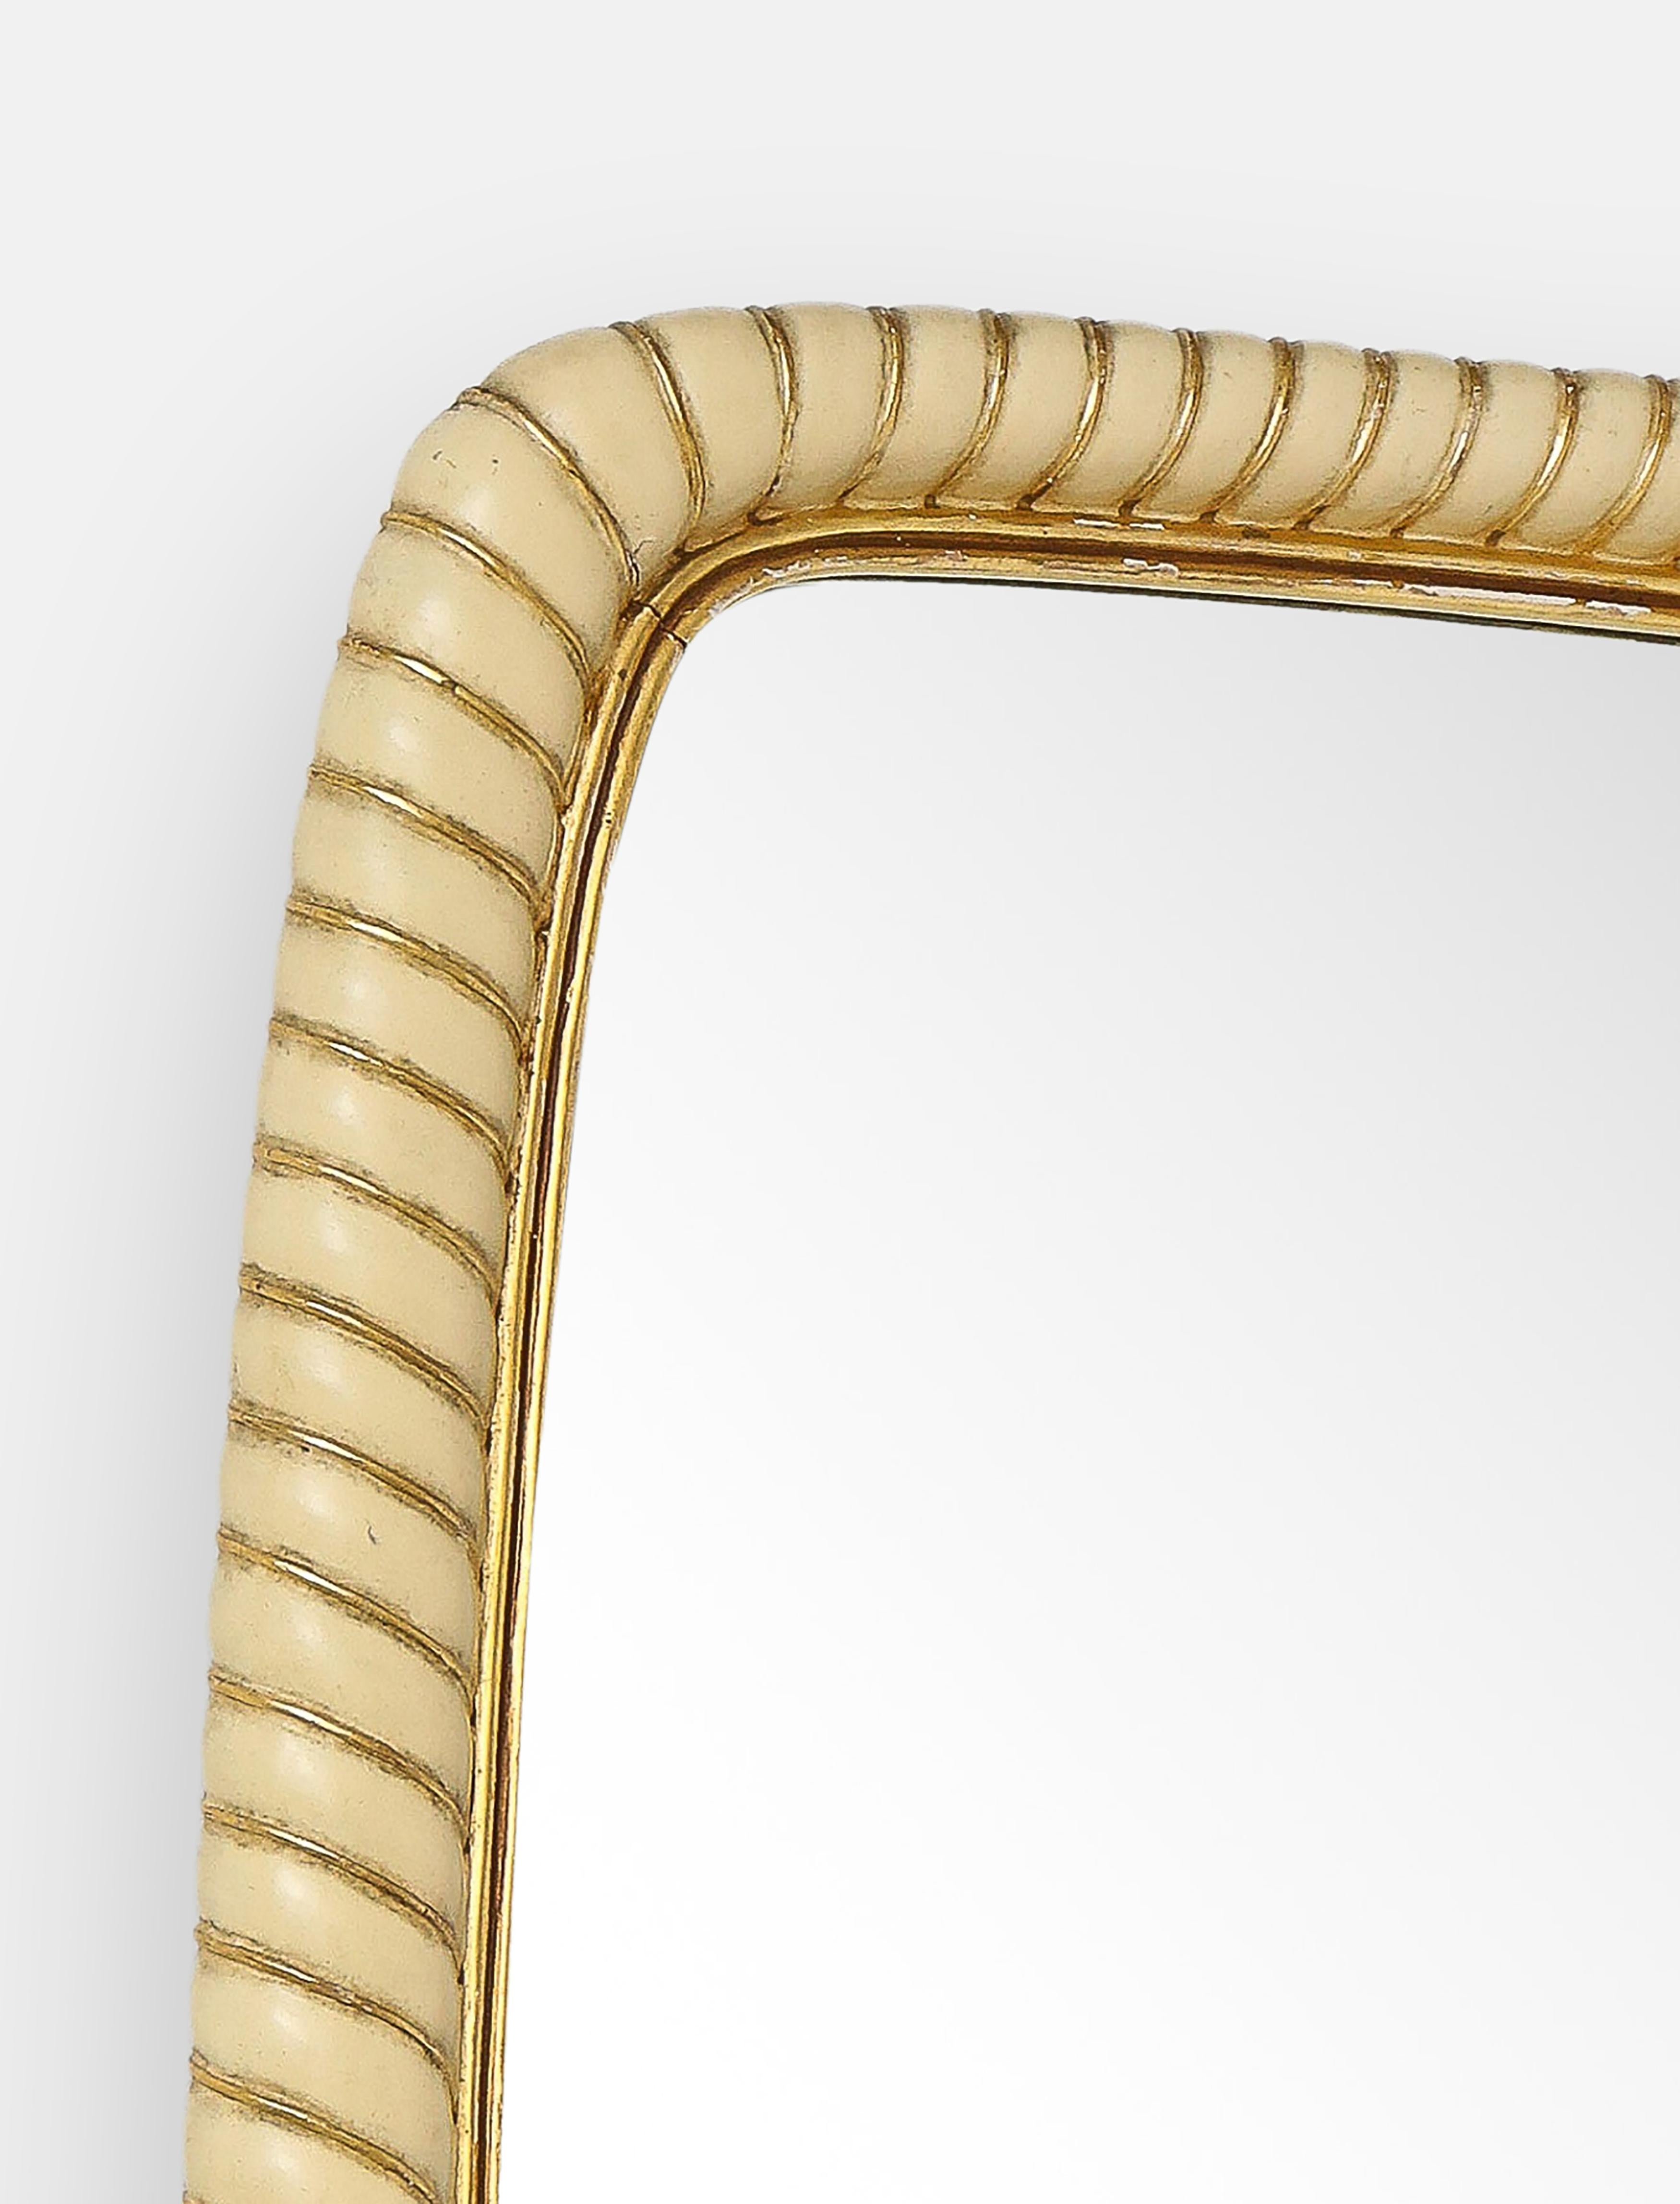 Osvaldo Borsani Rare Large Ivory Painted and Gilded Wood Mirror, Italy, 1940s For Sale 1